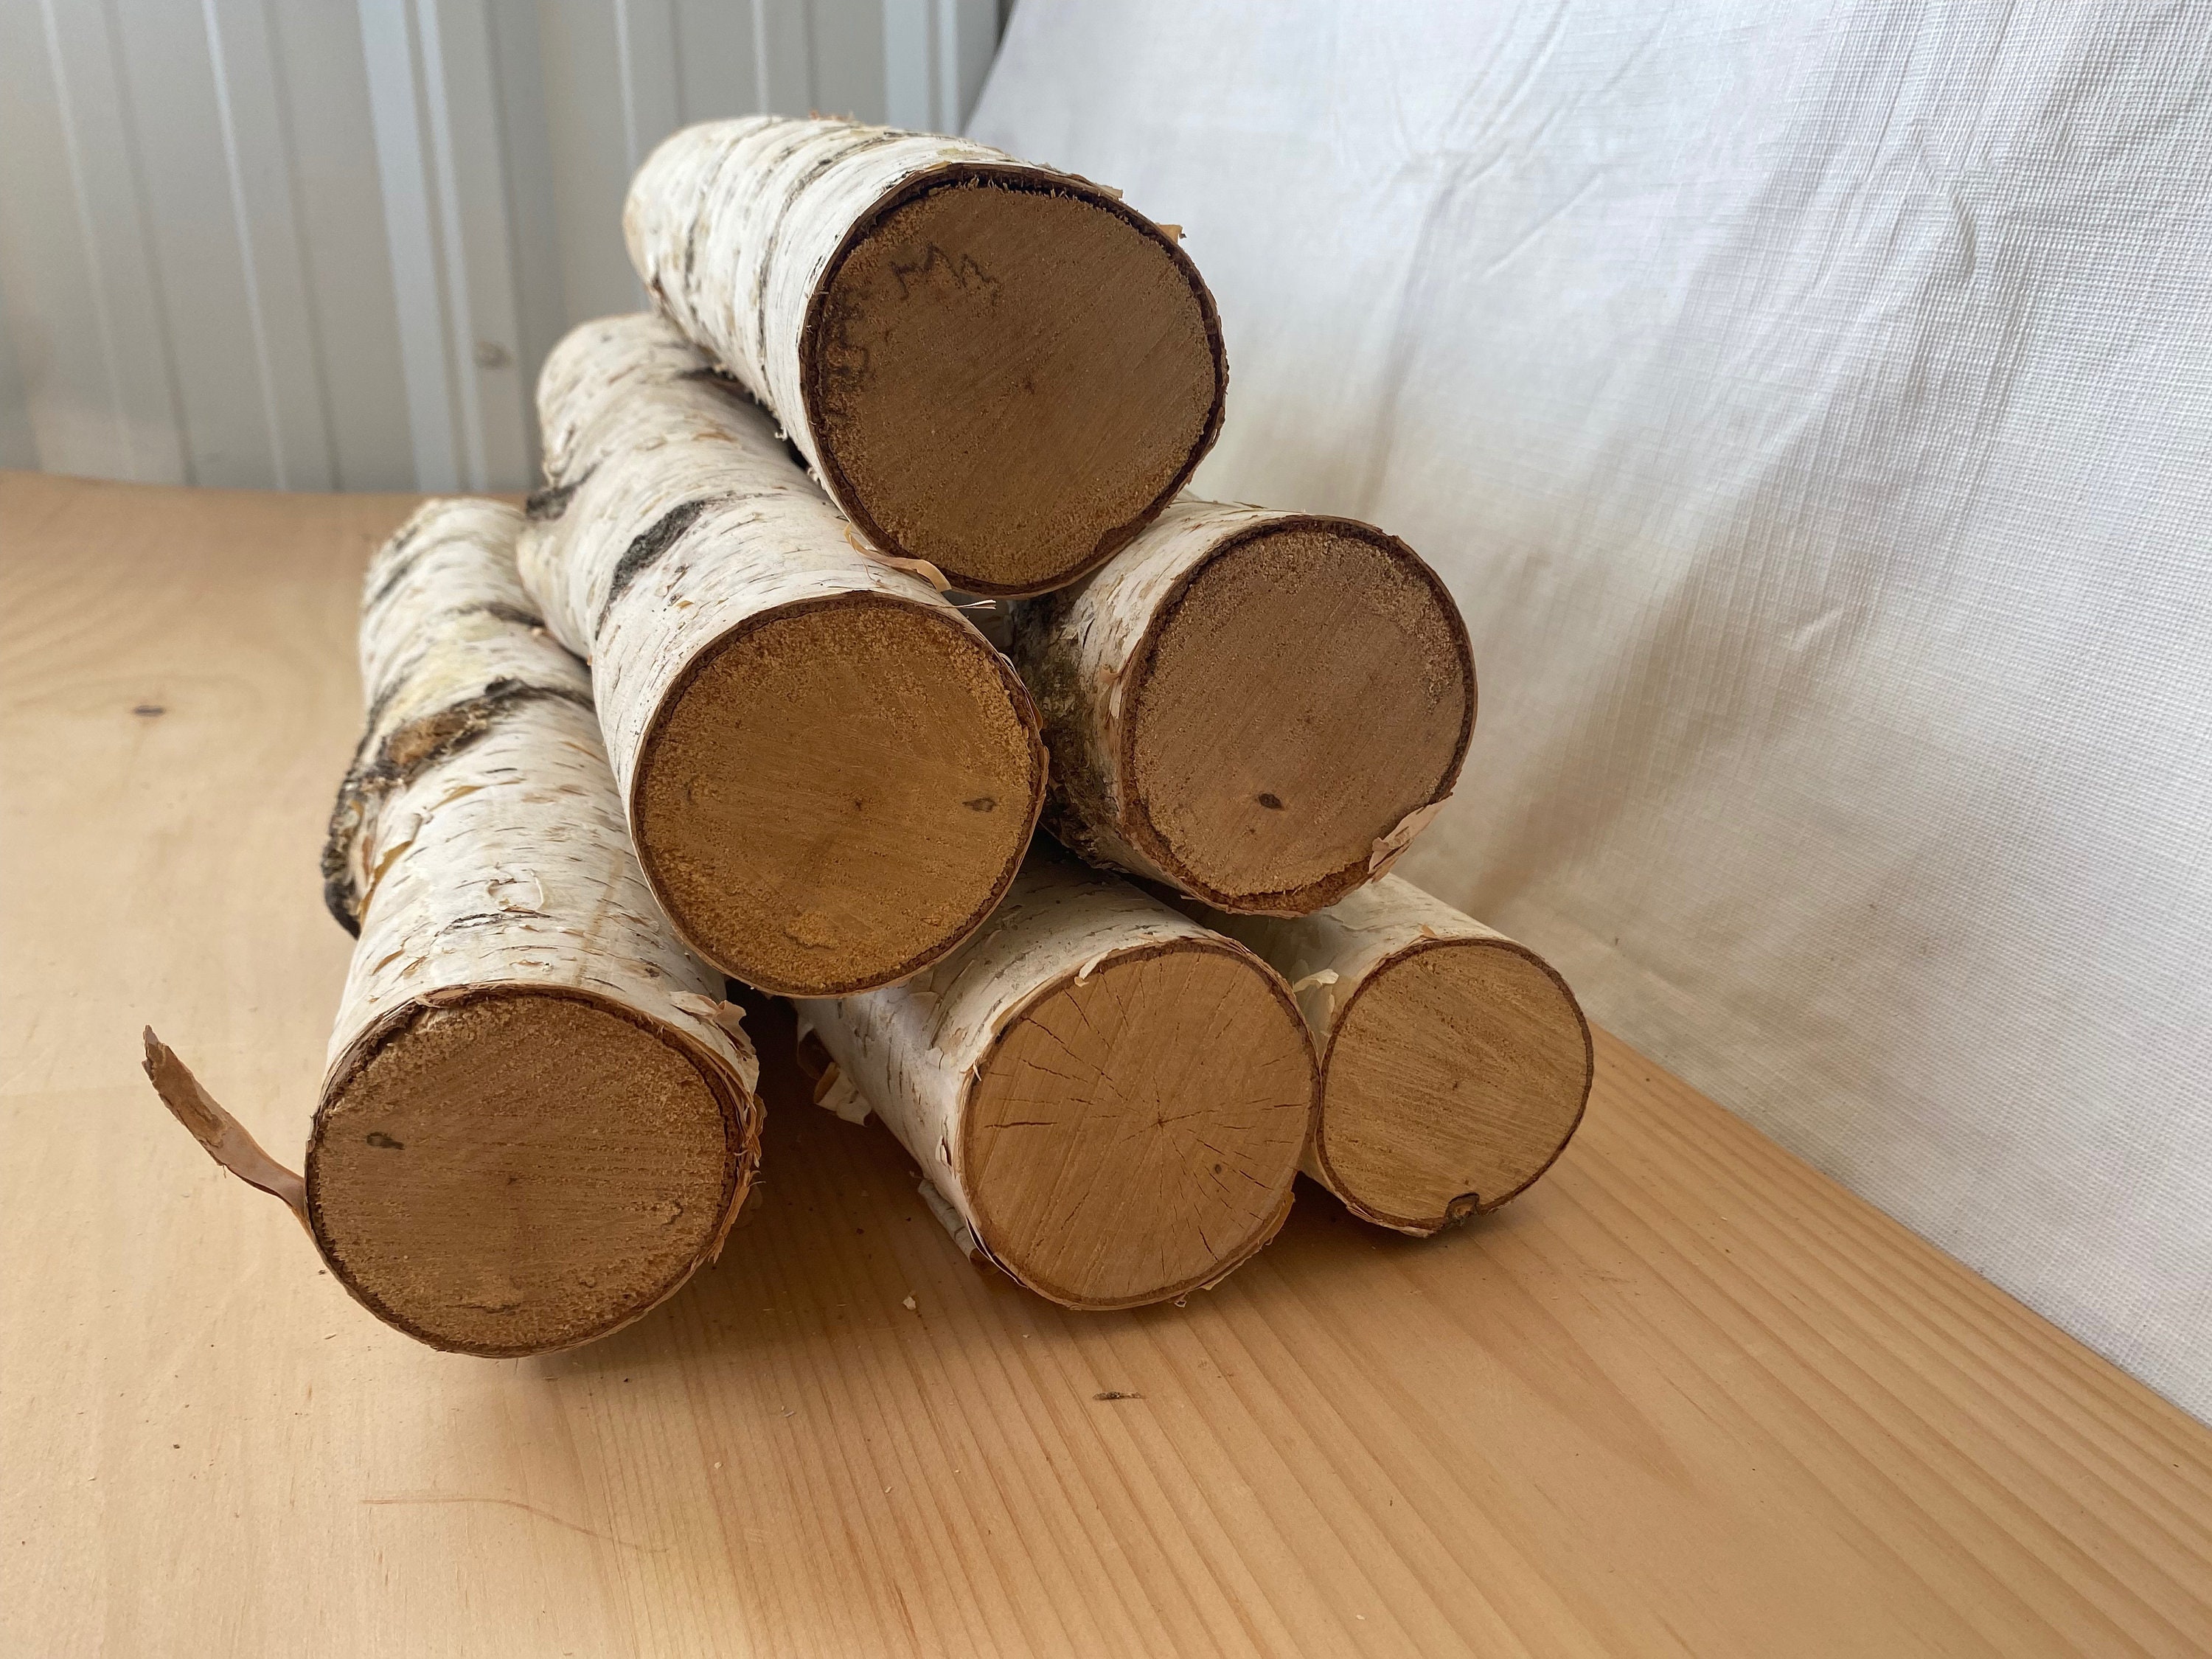 Amish-made Natural Medium White Birch Logs 2 to 3.5 Diameter Logs Qty 5  Logs Great for Crafting and Seasonal Decor Free Shipping 